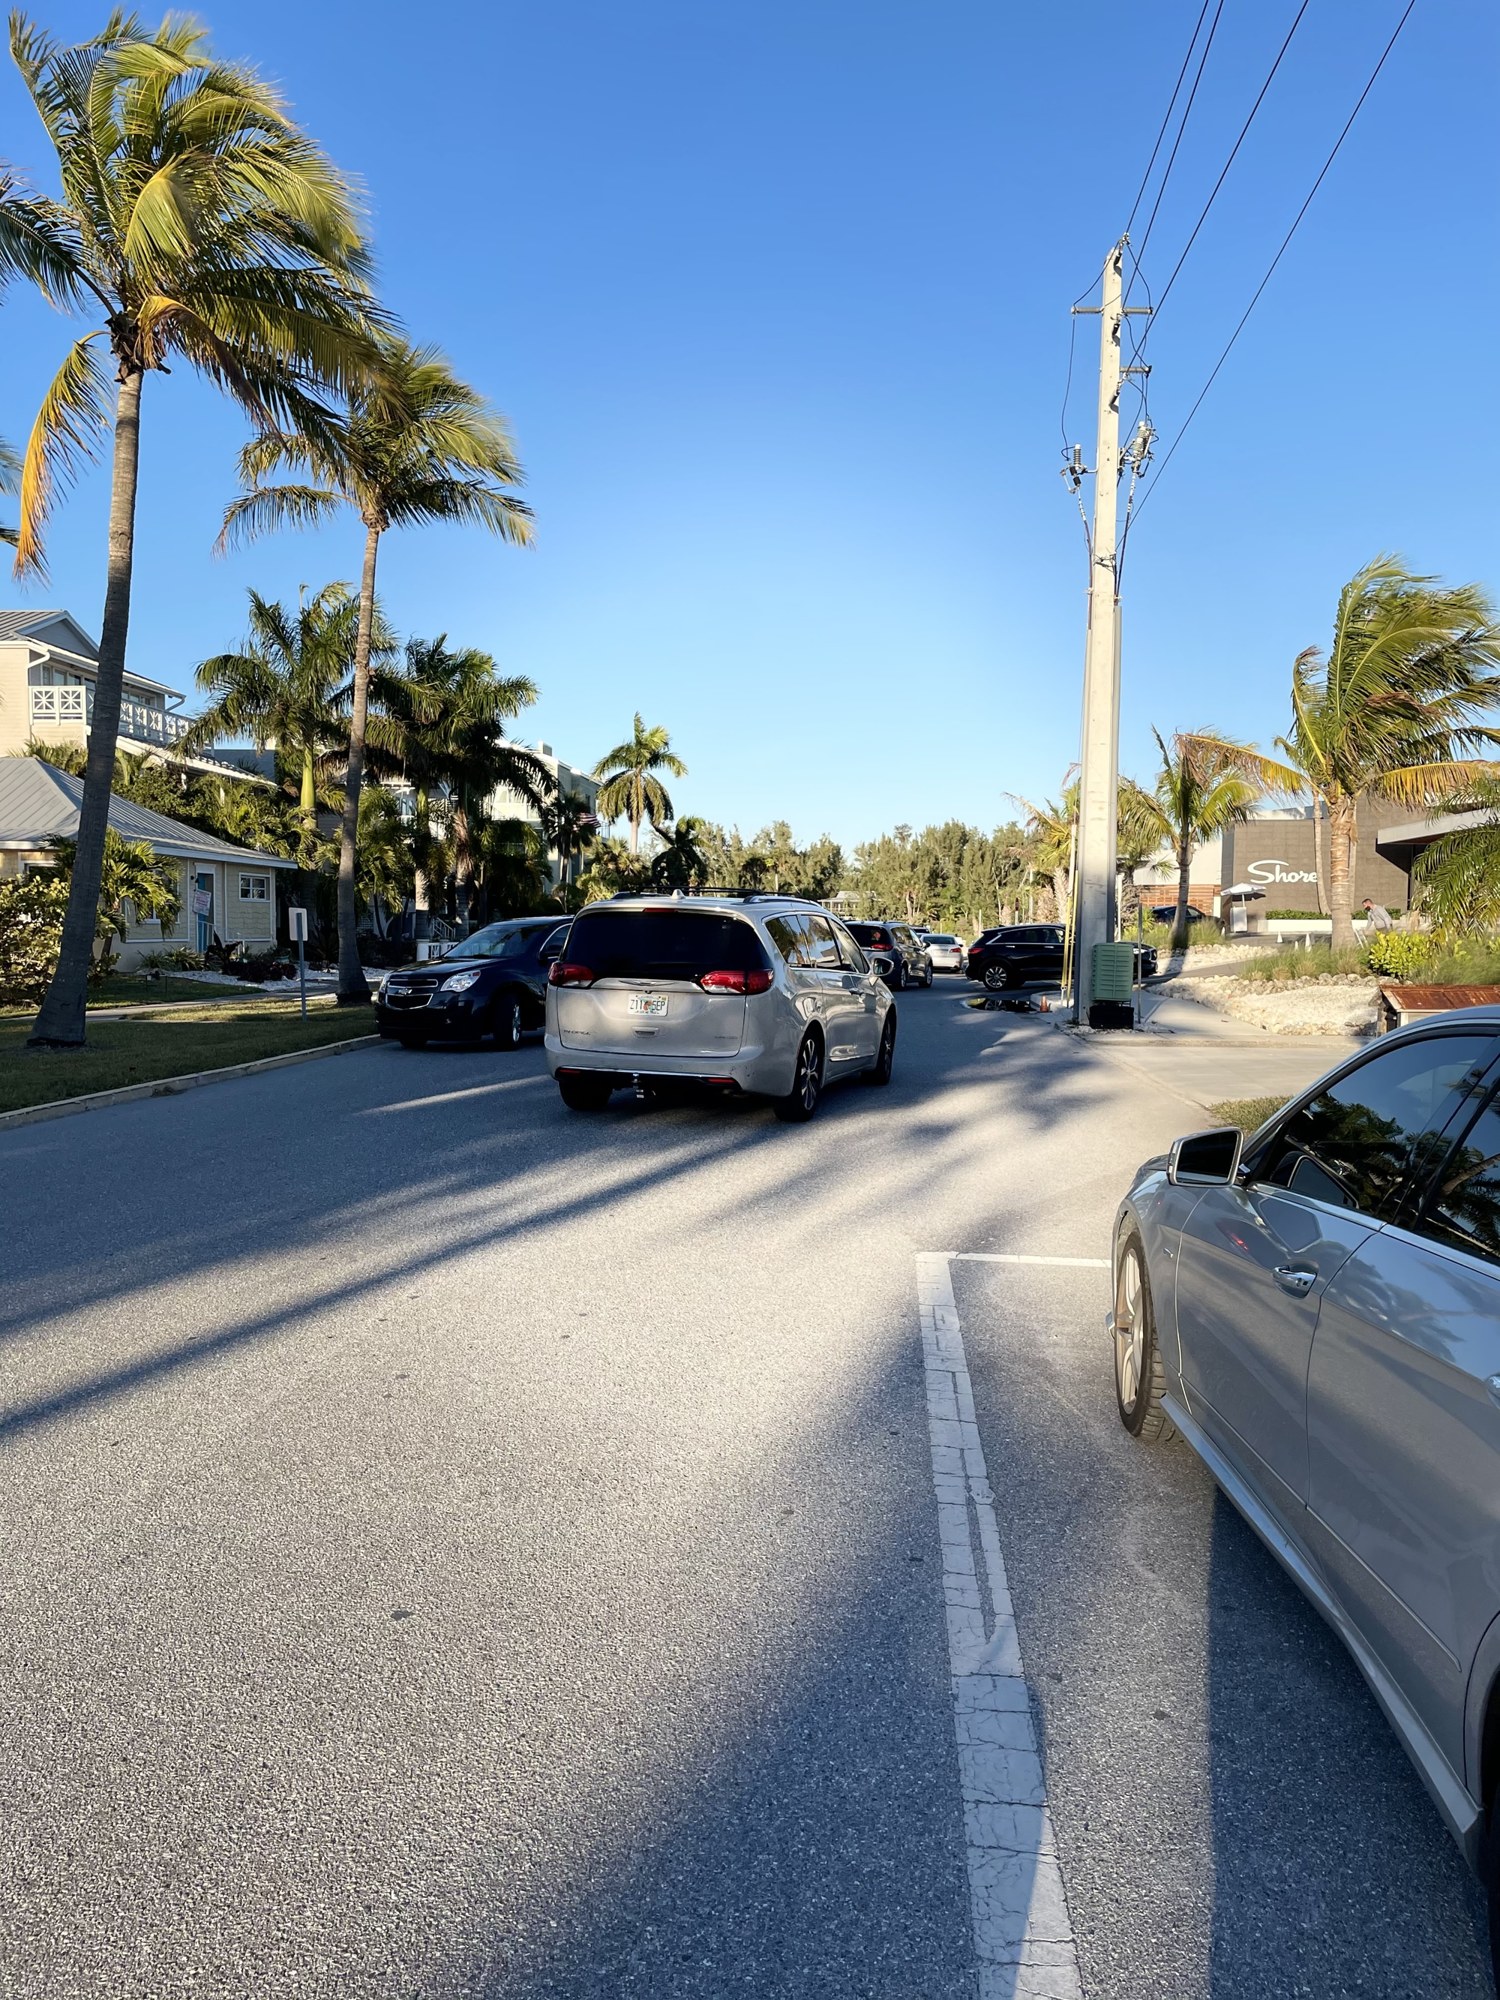 The town of Longboat Key continues to sort through enforcement of the resident permit parking program in the Longbeach Village neighborhood, which started on Jan. 1. Photo Credit: Patricia Lopez